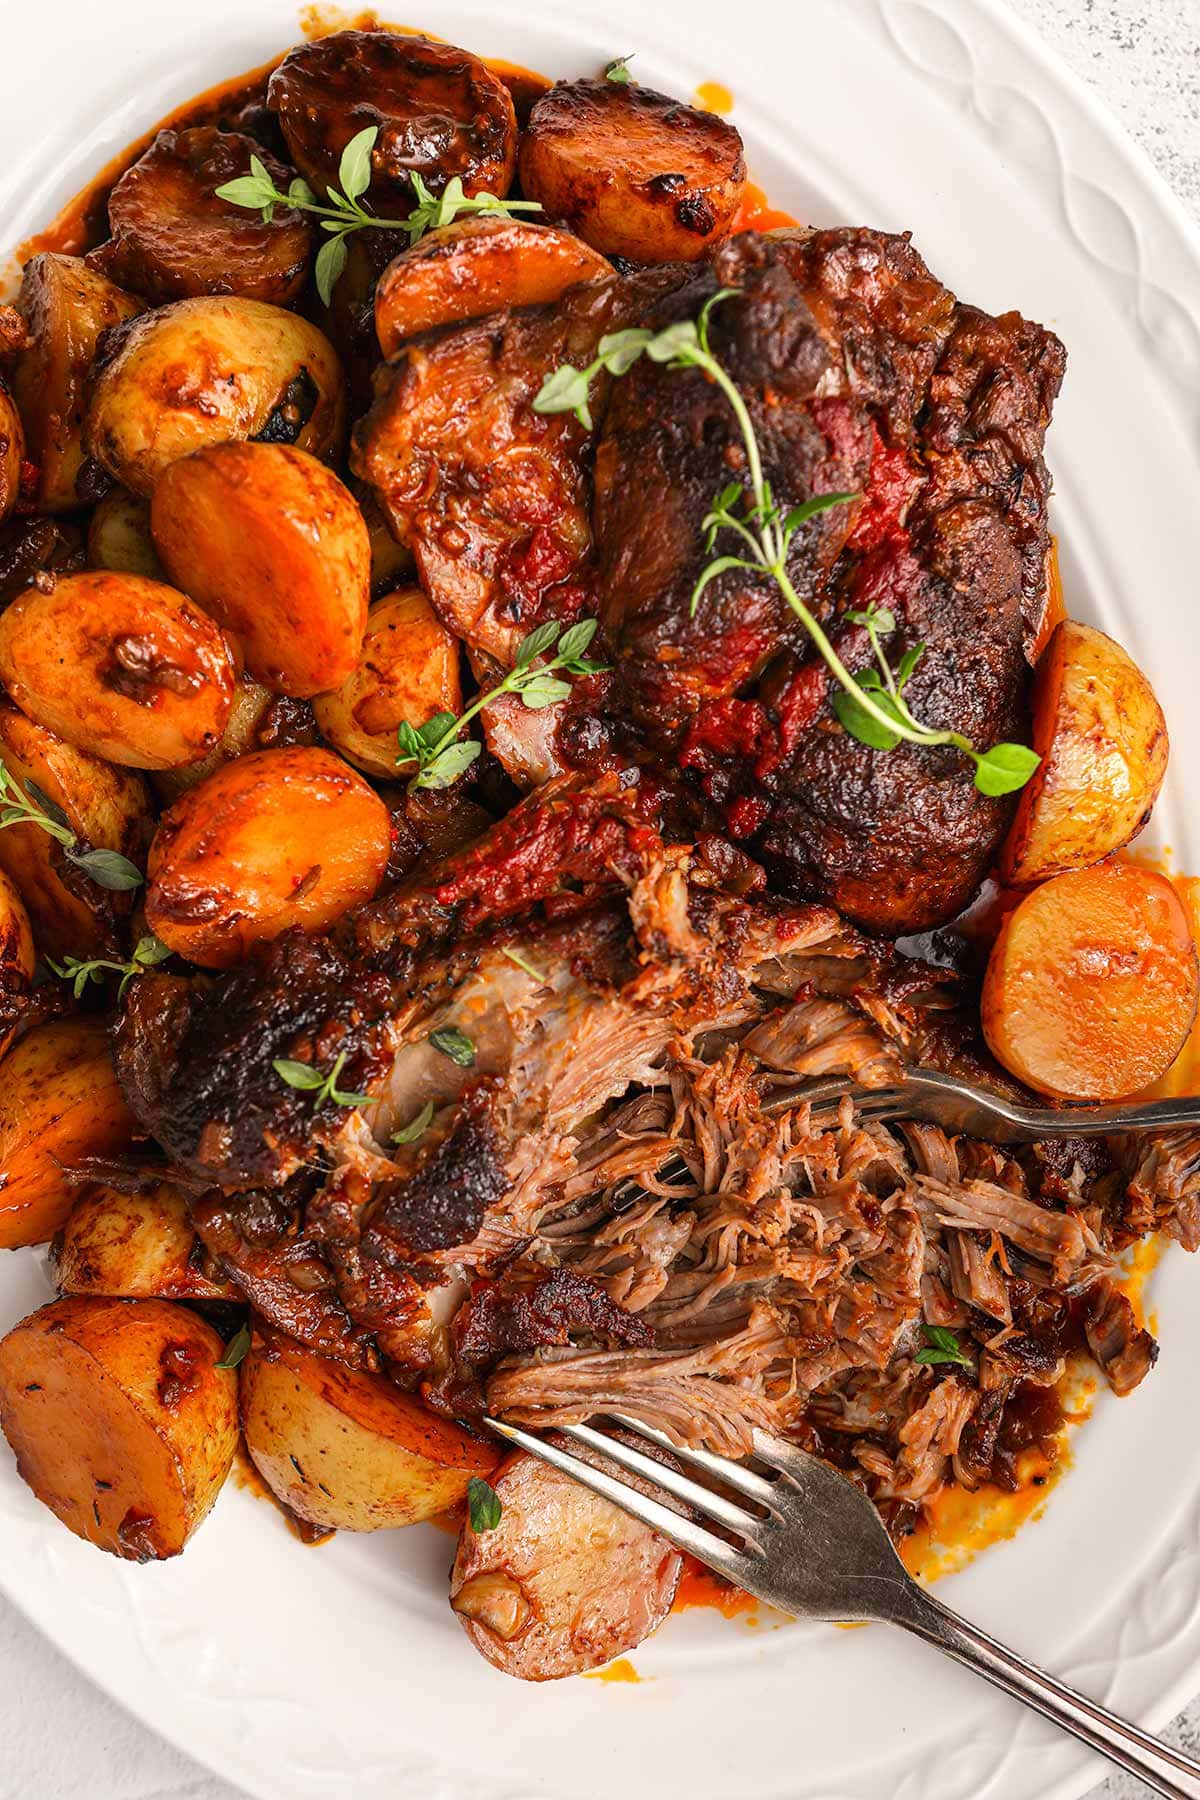 Irish Guinness Roast Lamb with potatoes on serving plate with forks shredding